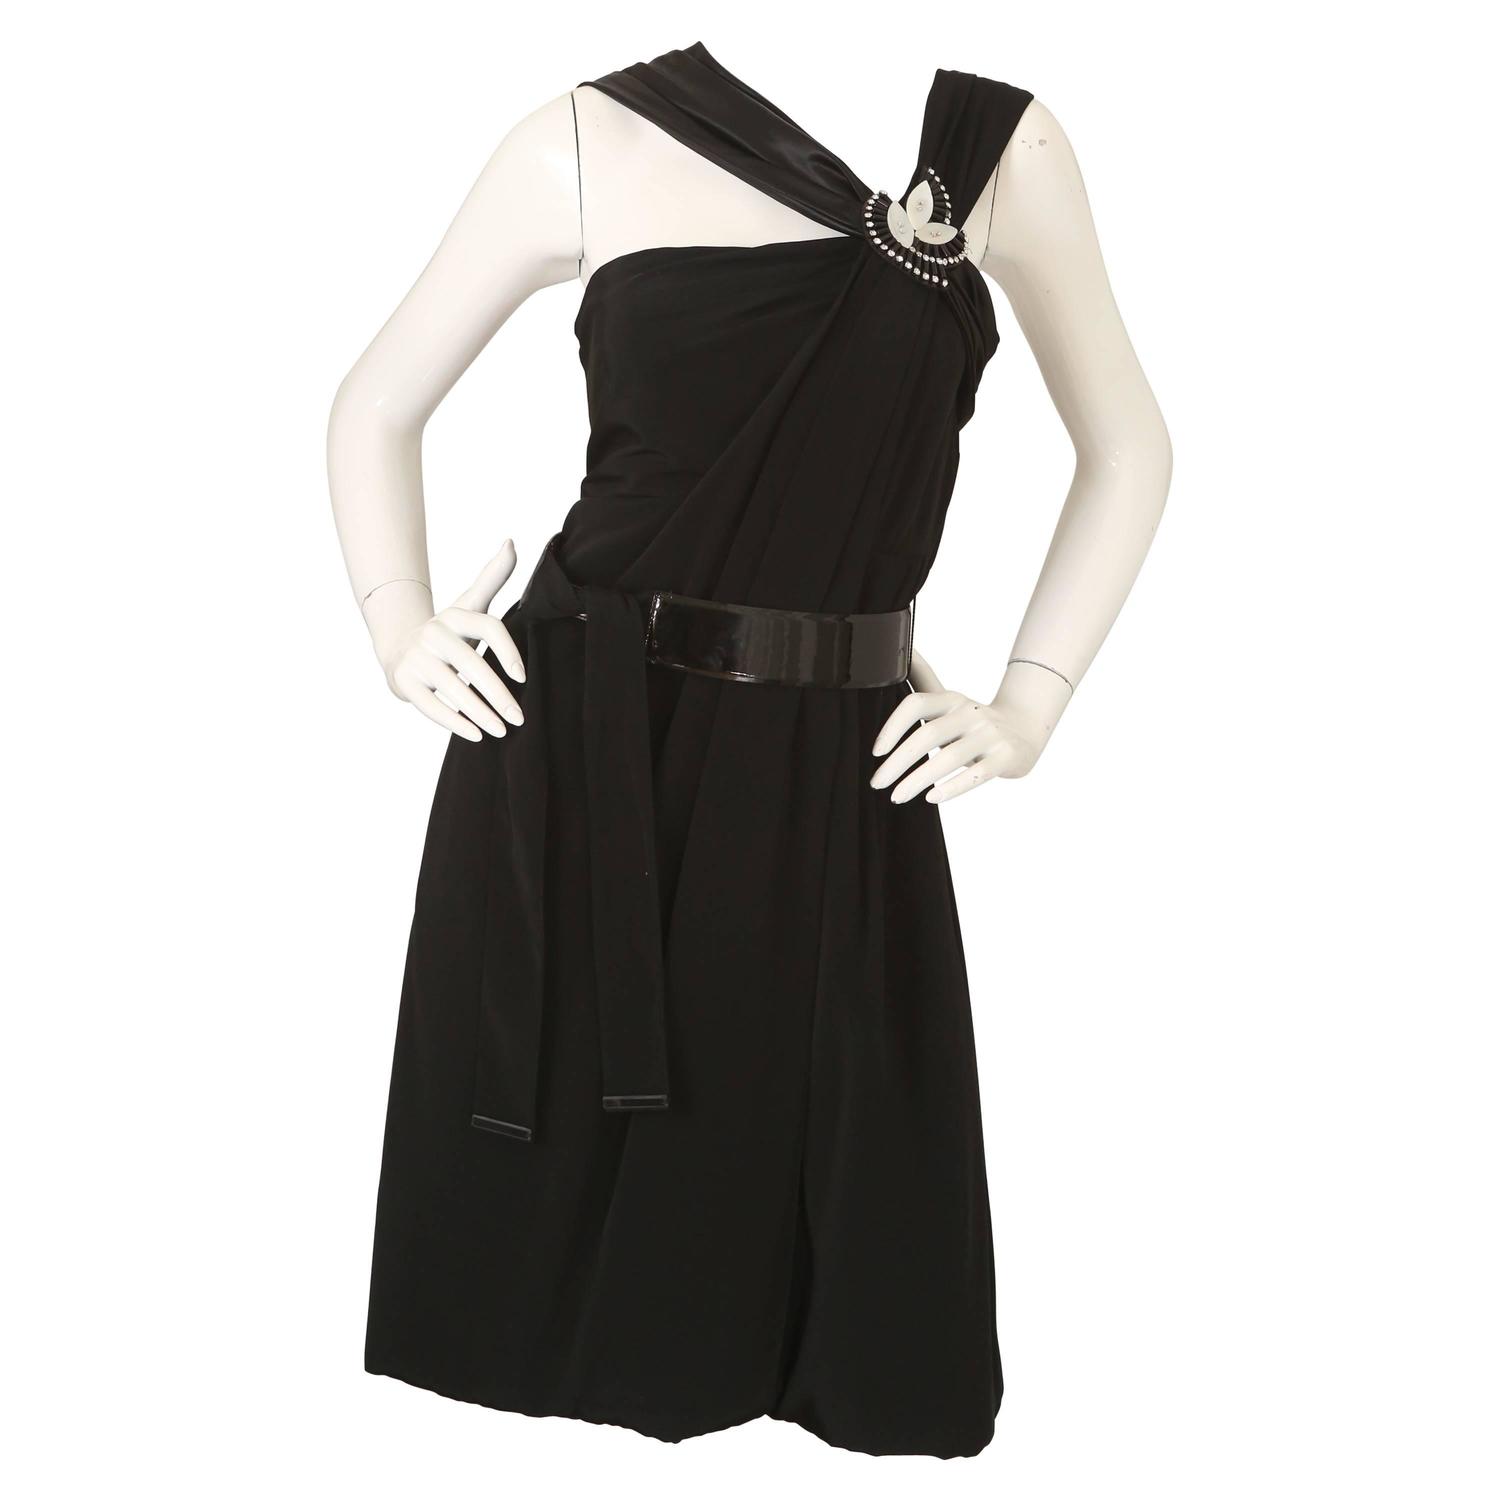 Gucci Black Cocktail Dress W/ Belt and Embellishment For Sale at 1stdibs